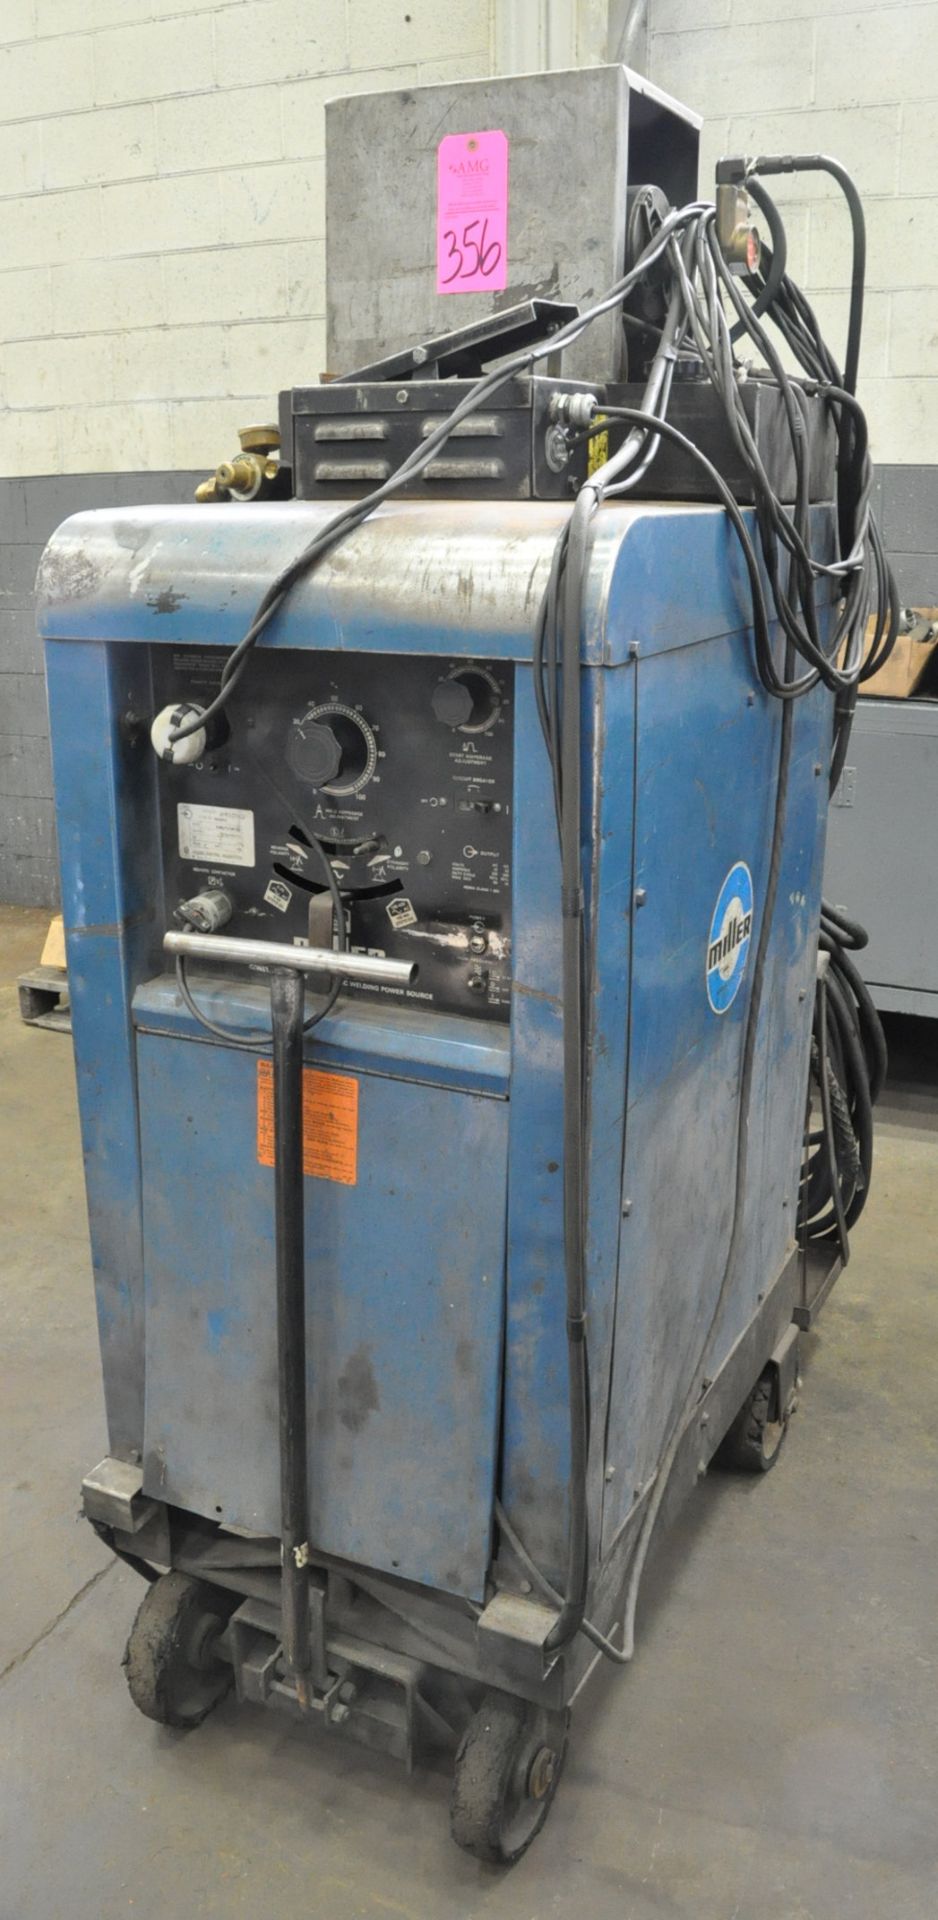 Miller 330A/BP, 300-Amp Capacity, CC AC/DC Tig Welding Power Source, S/n JF925982, Foot Pedal